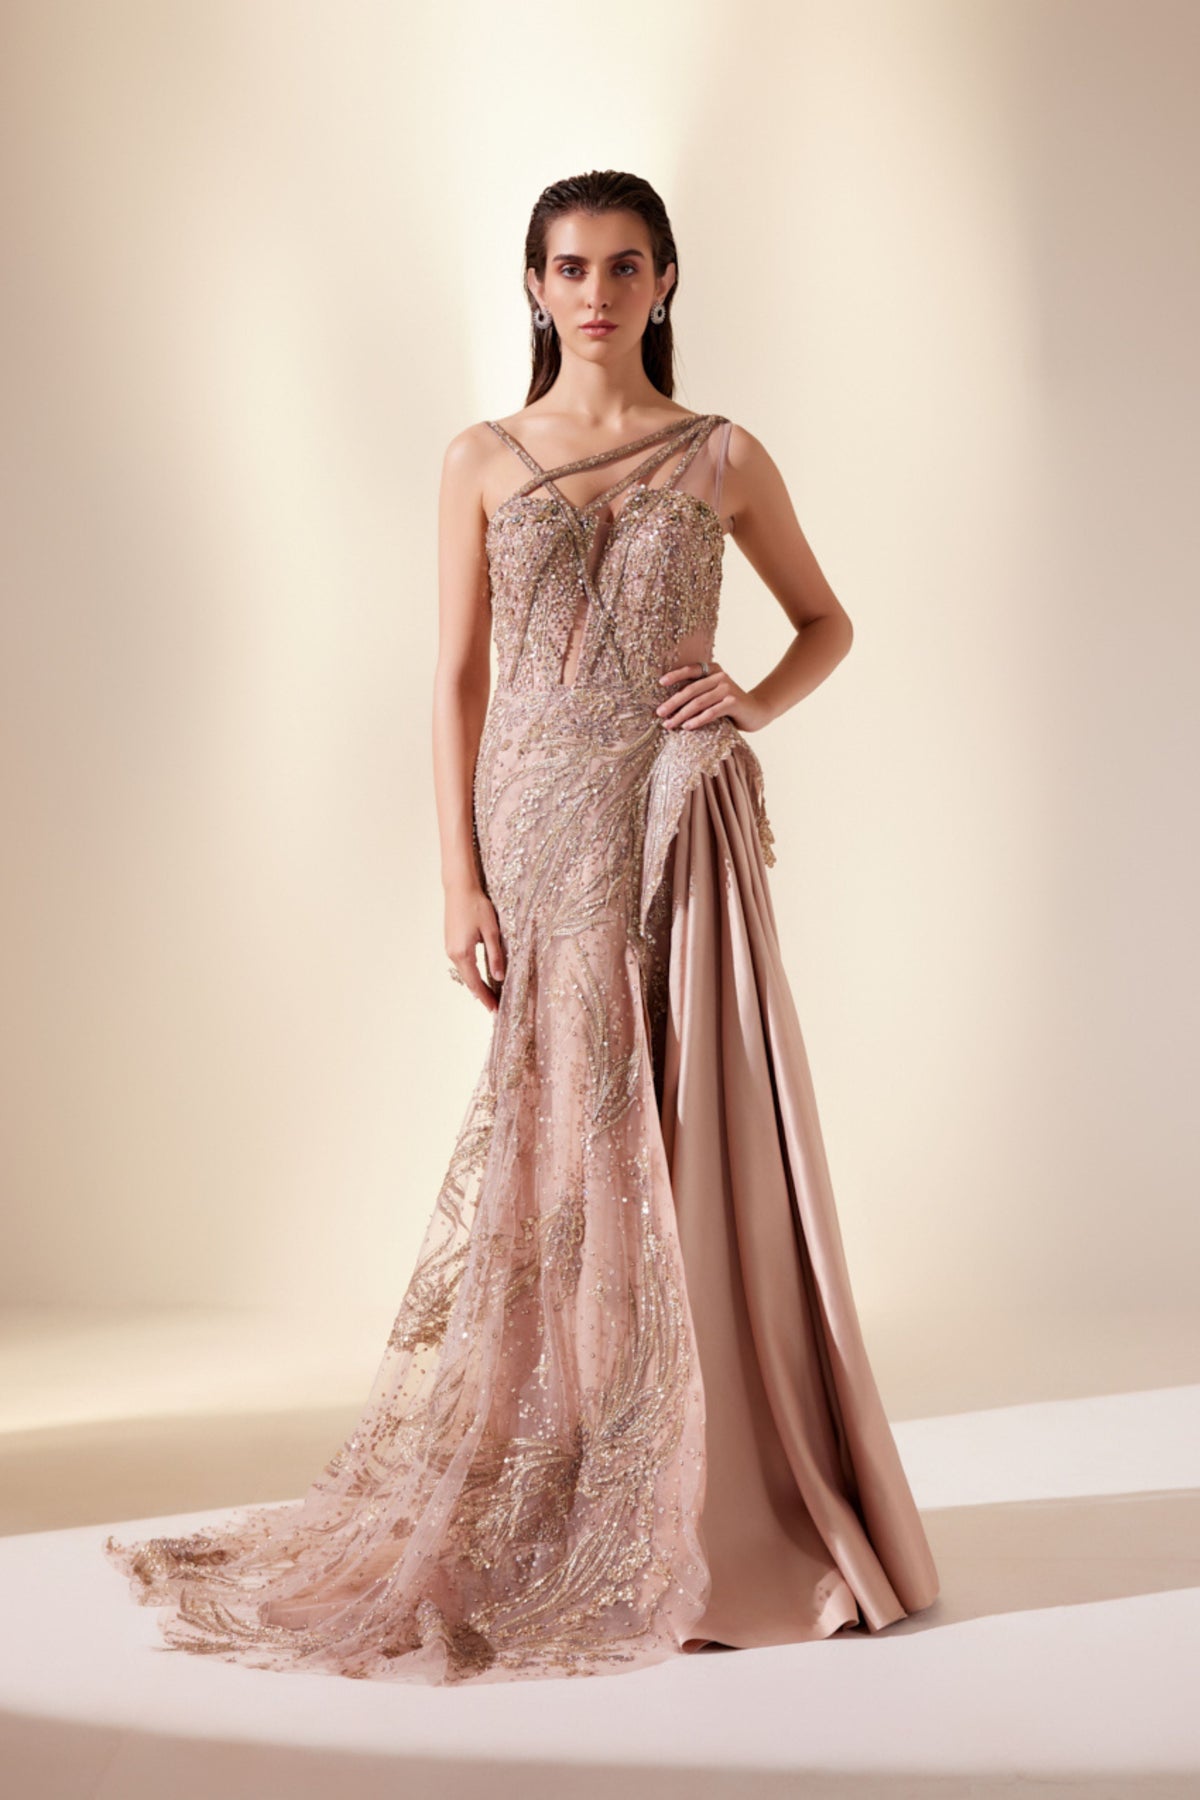 Luminescent Peach Gown